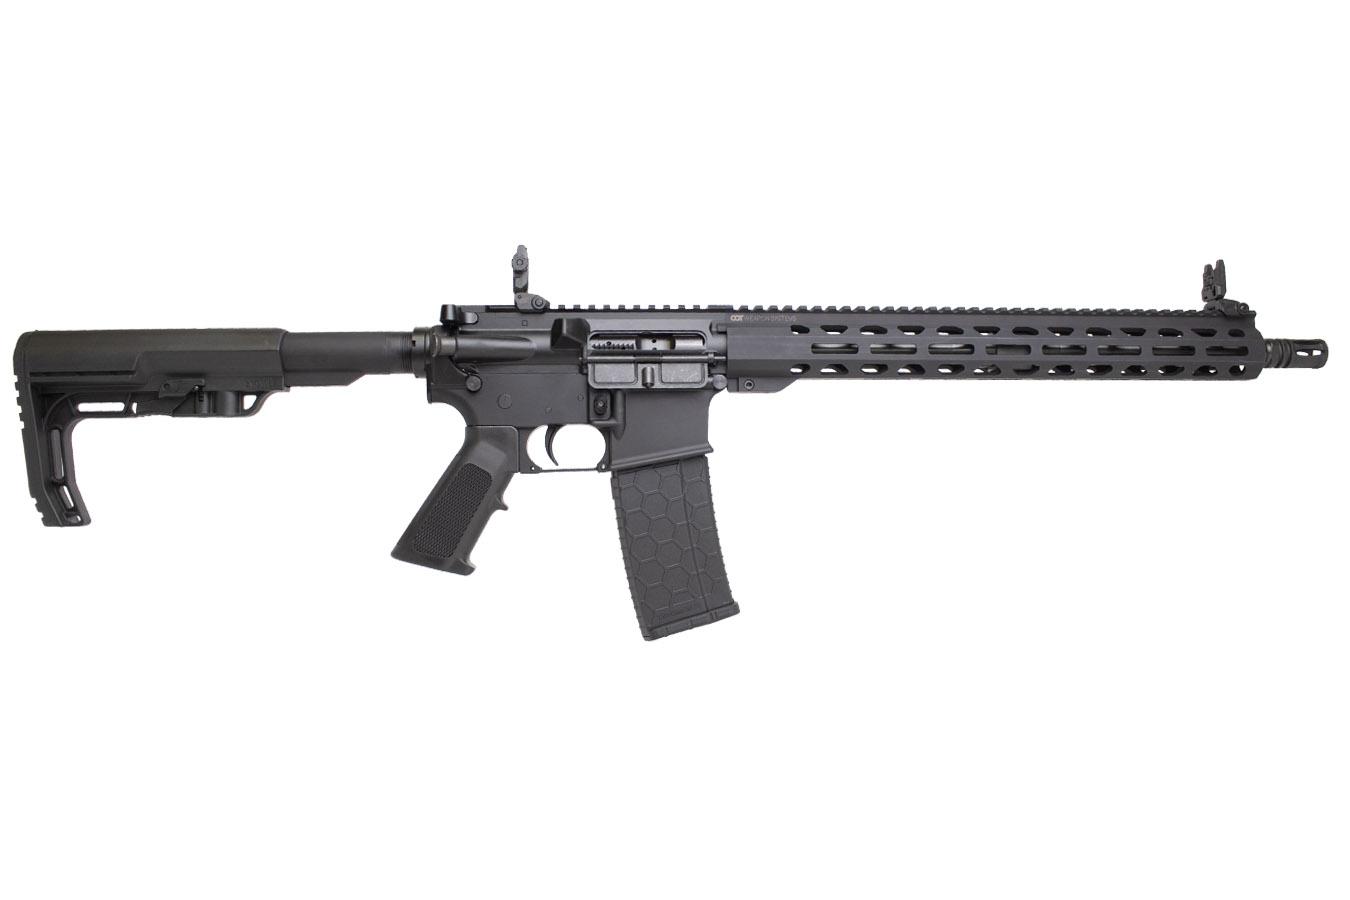 No. 31 Best Selling: CQT WEAPON SYSTEMS CQT15 5.56MM 16` BARREL